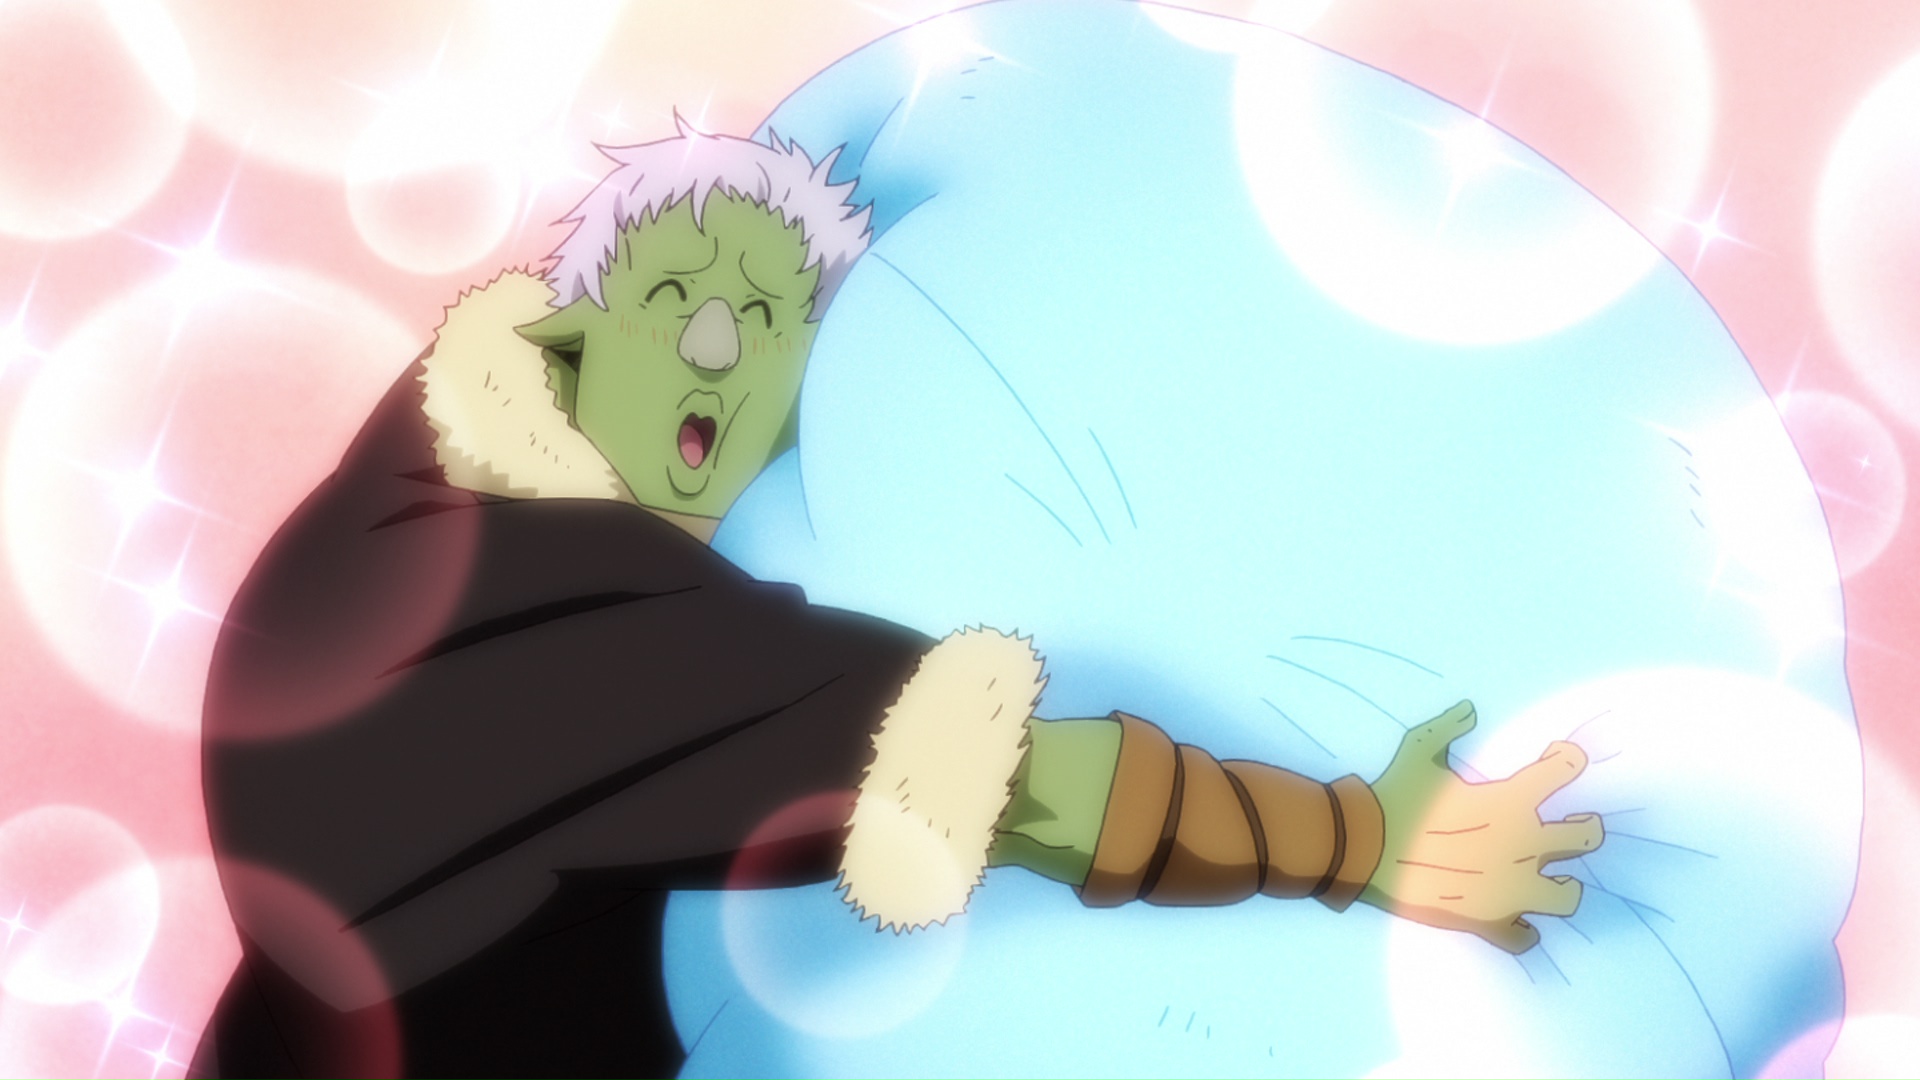 that time i got reincarnated as a slime anime